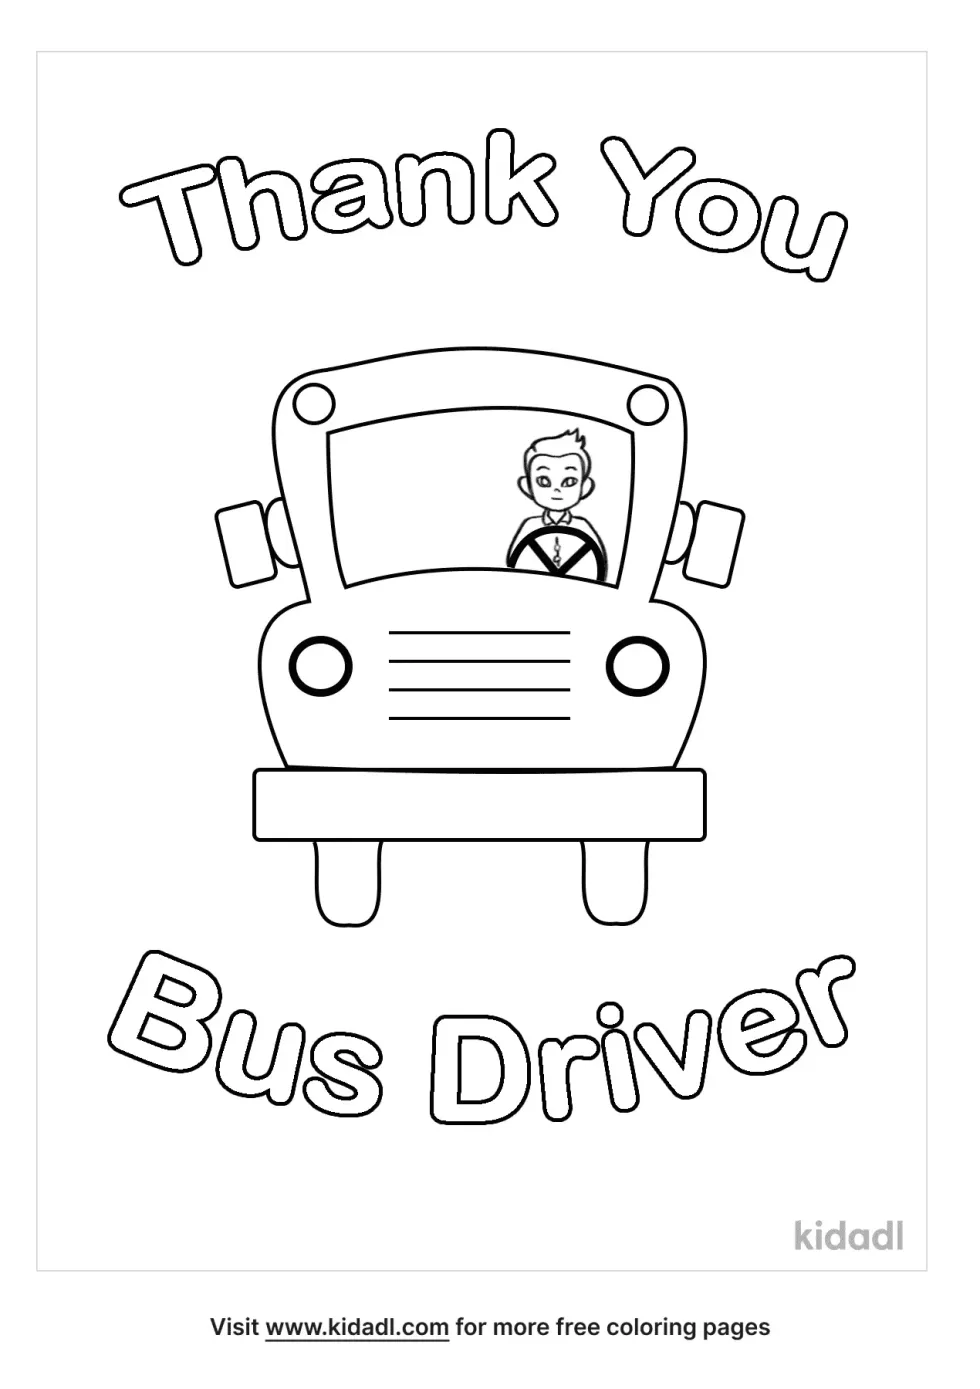 Thank You Bus Driver Coloring Page